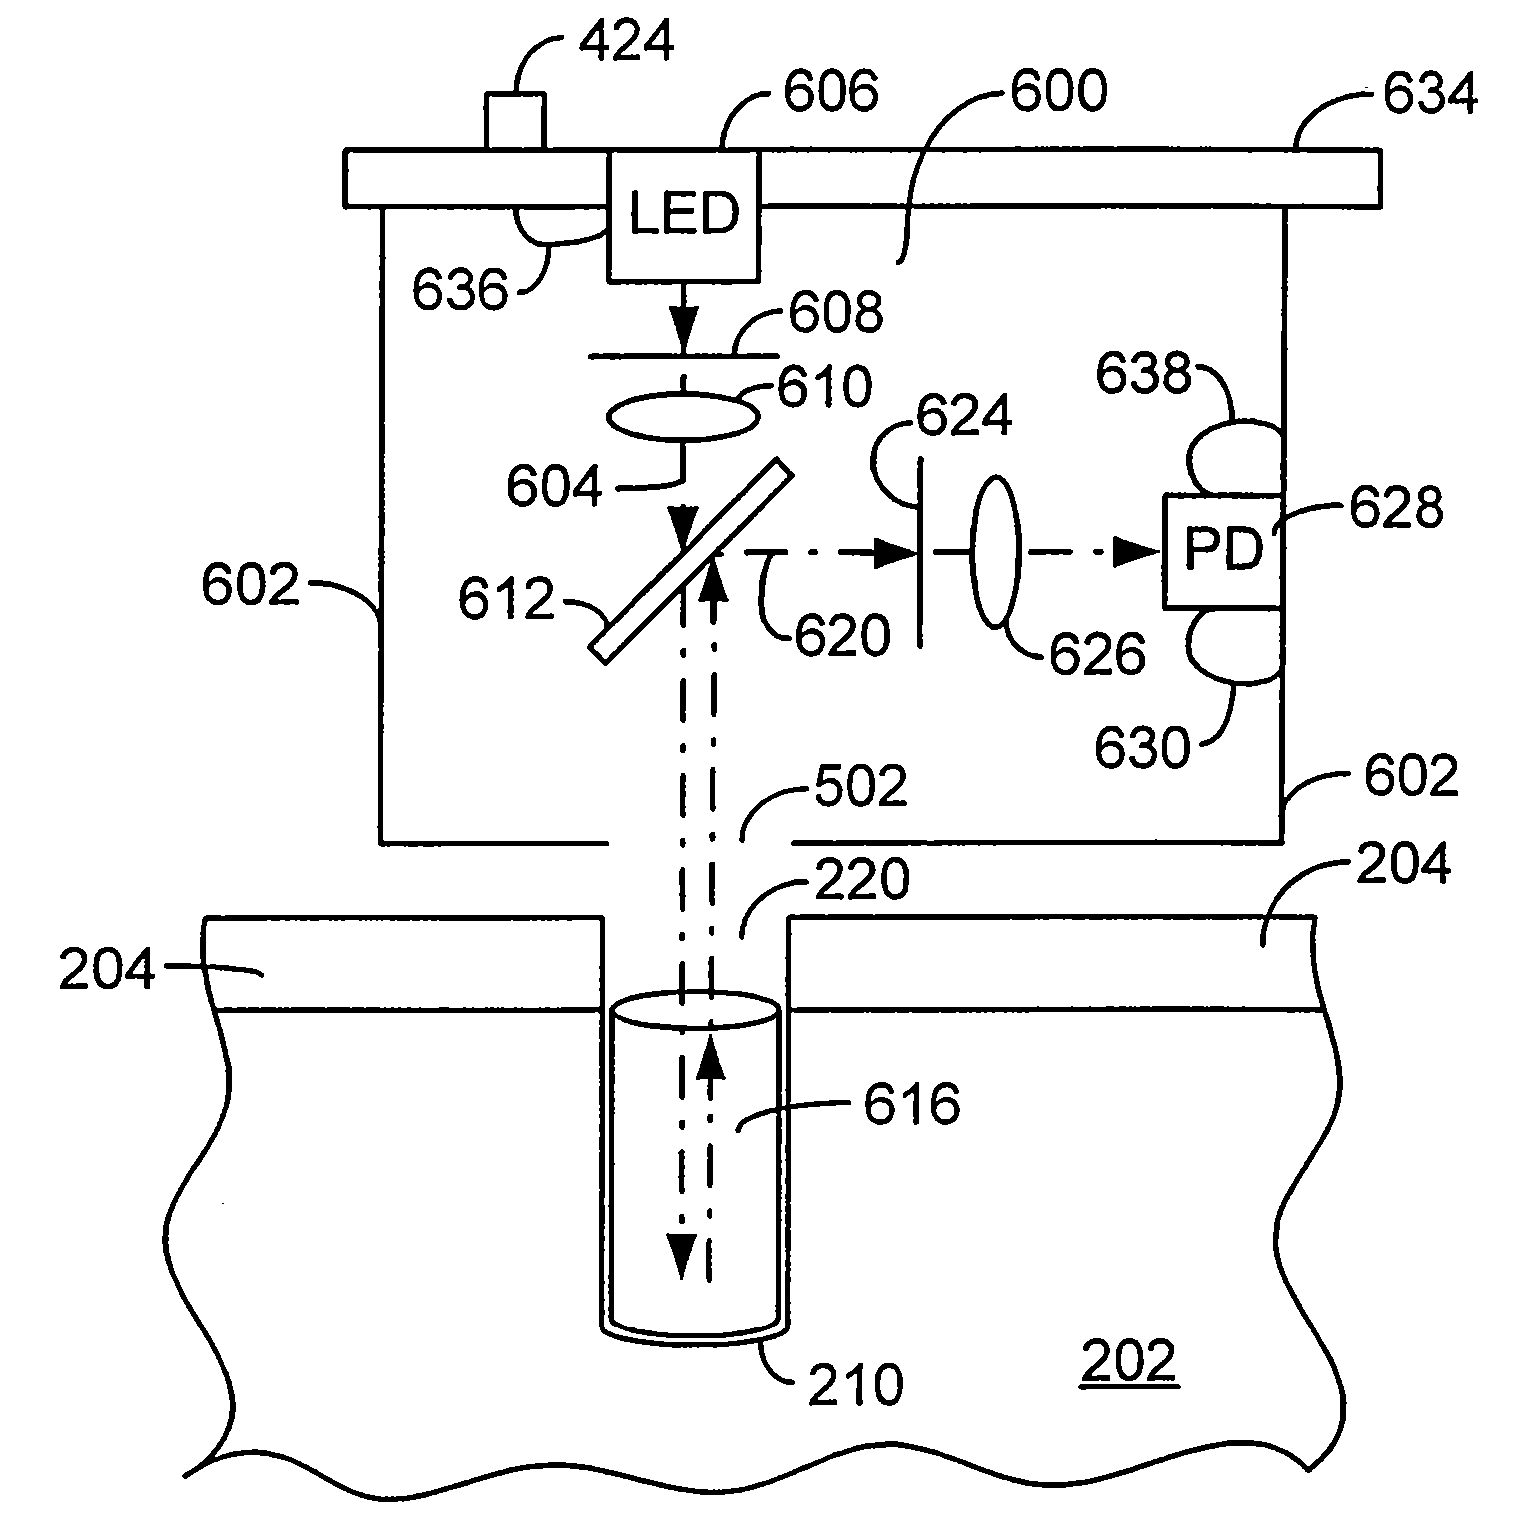 Systems and methods for fluorescence detection with a movable detection module